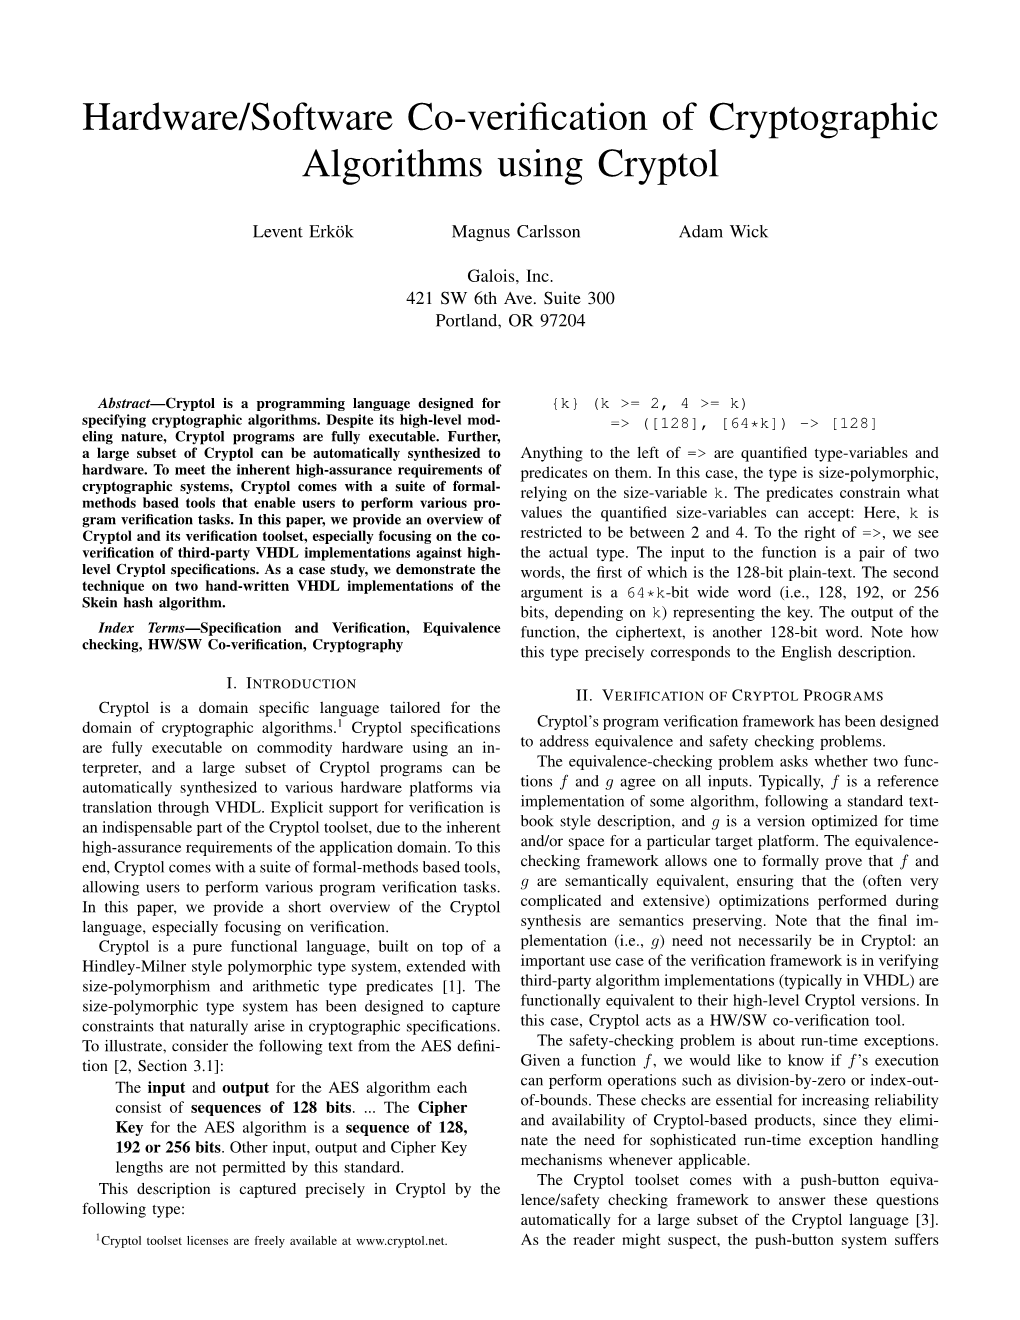 Hardware/Software Co-Verification of Cryptographic Algorithms Using